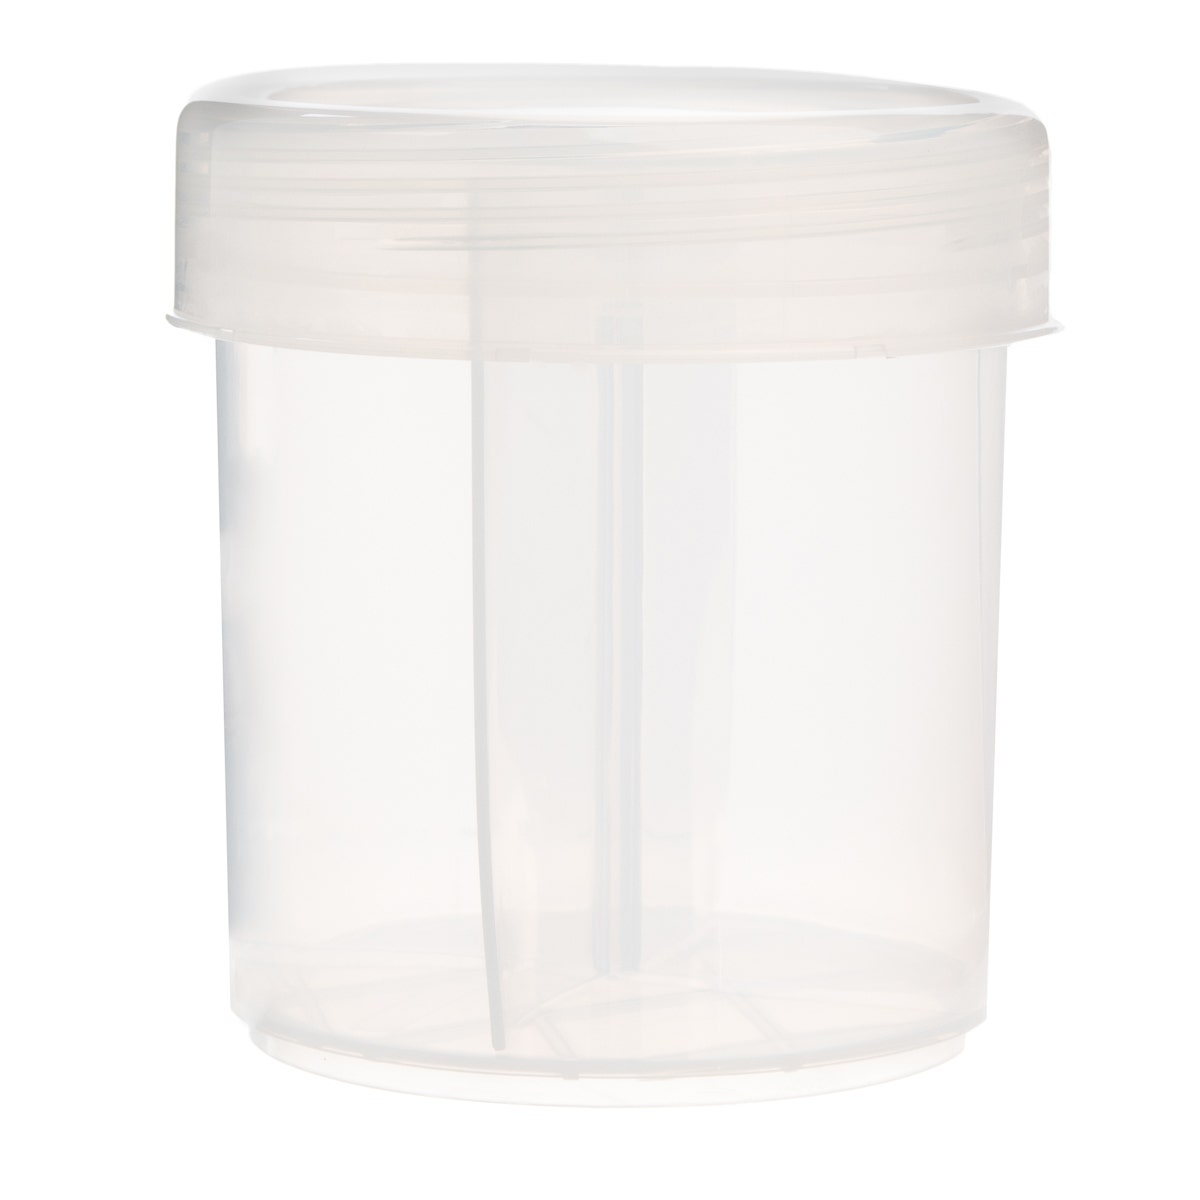 Score Containers, Organizers, and Gadgets Up to 58% Off Right Now at